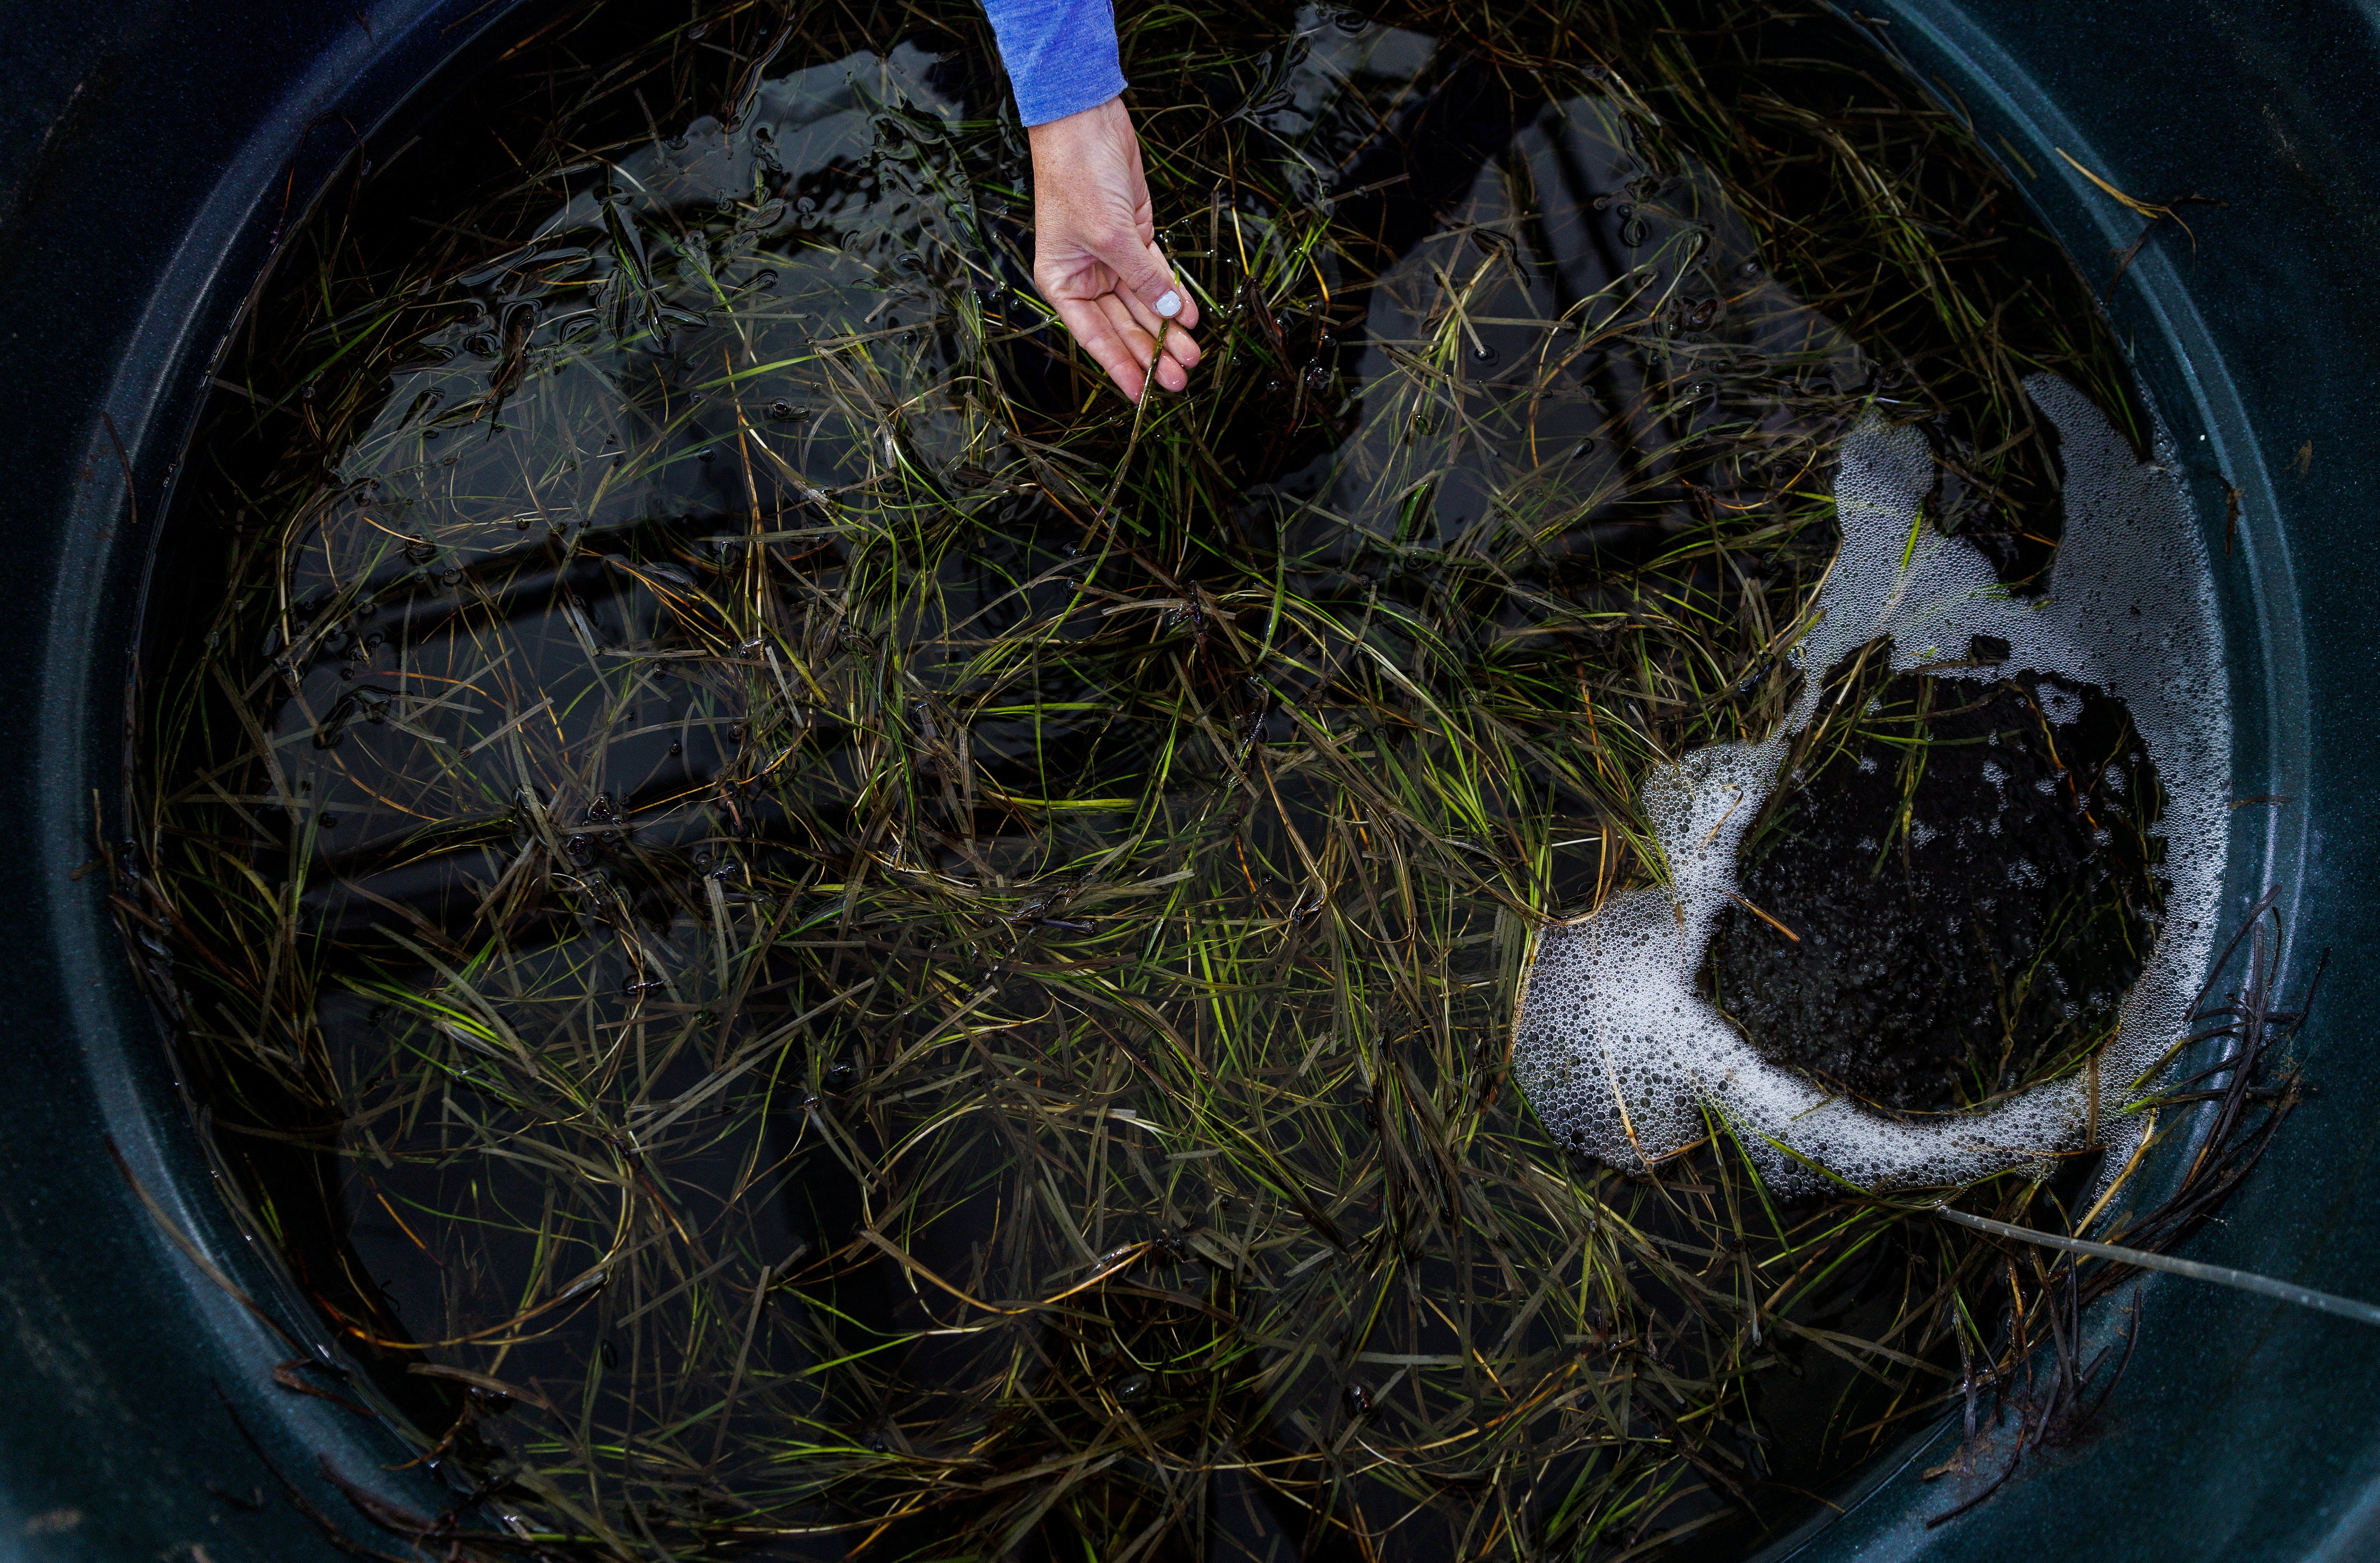 Flowering seagrass, collected to harvest the seeds, floats in a tank at the lab in Kiel, Germany, 11 July